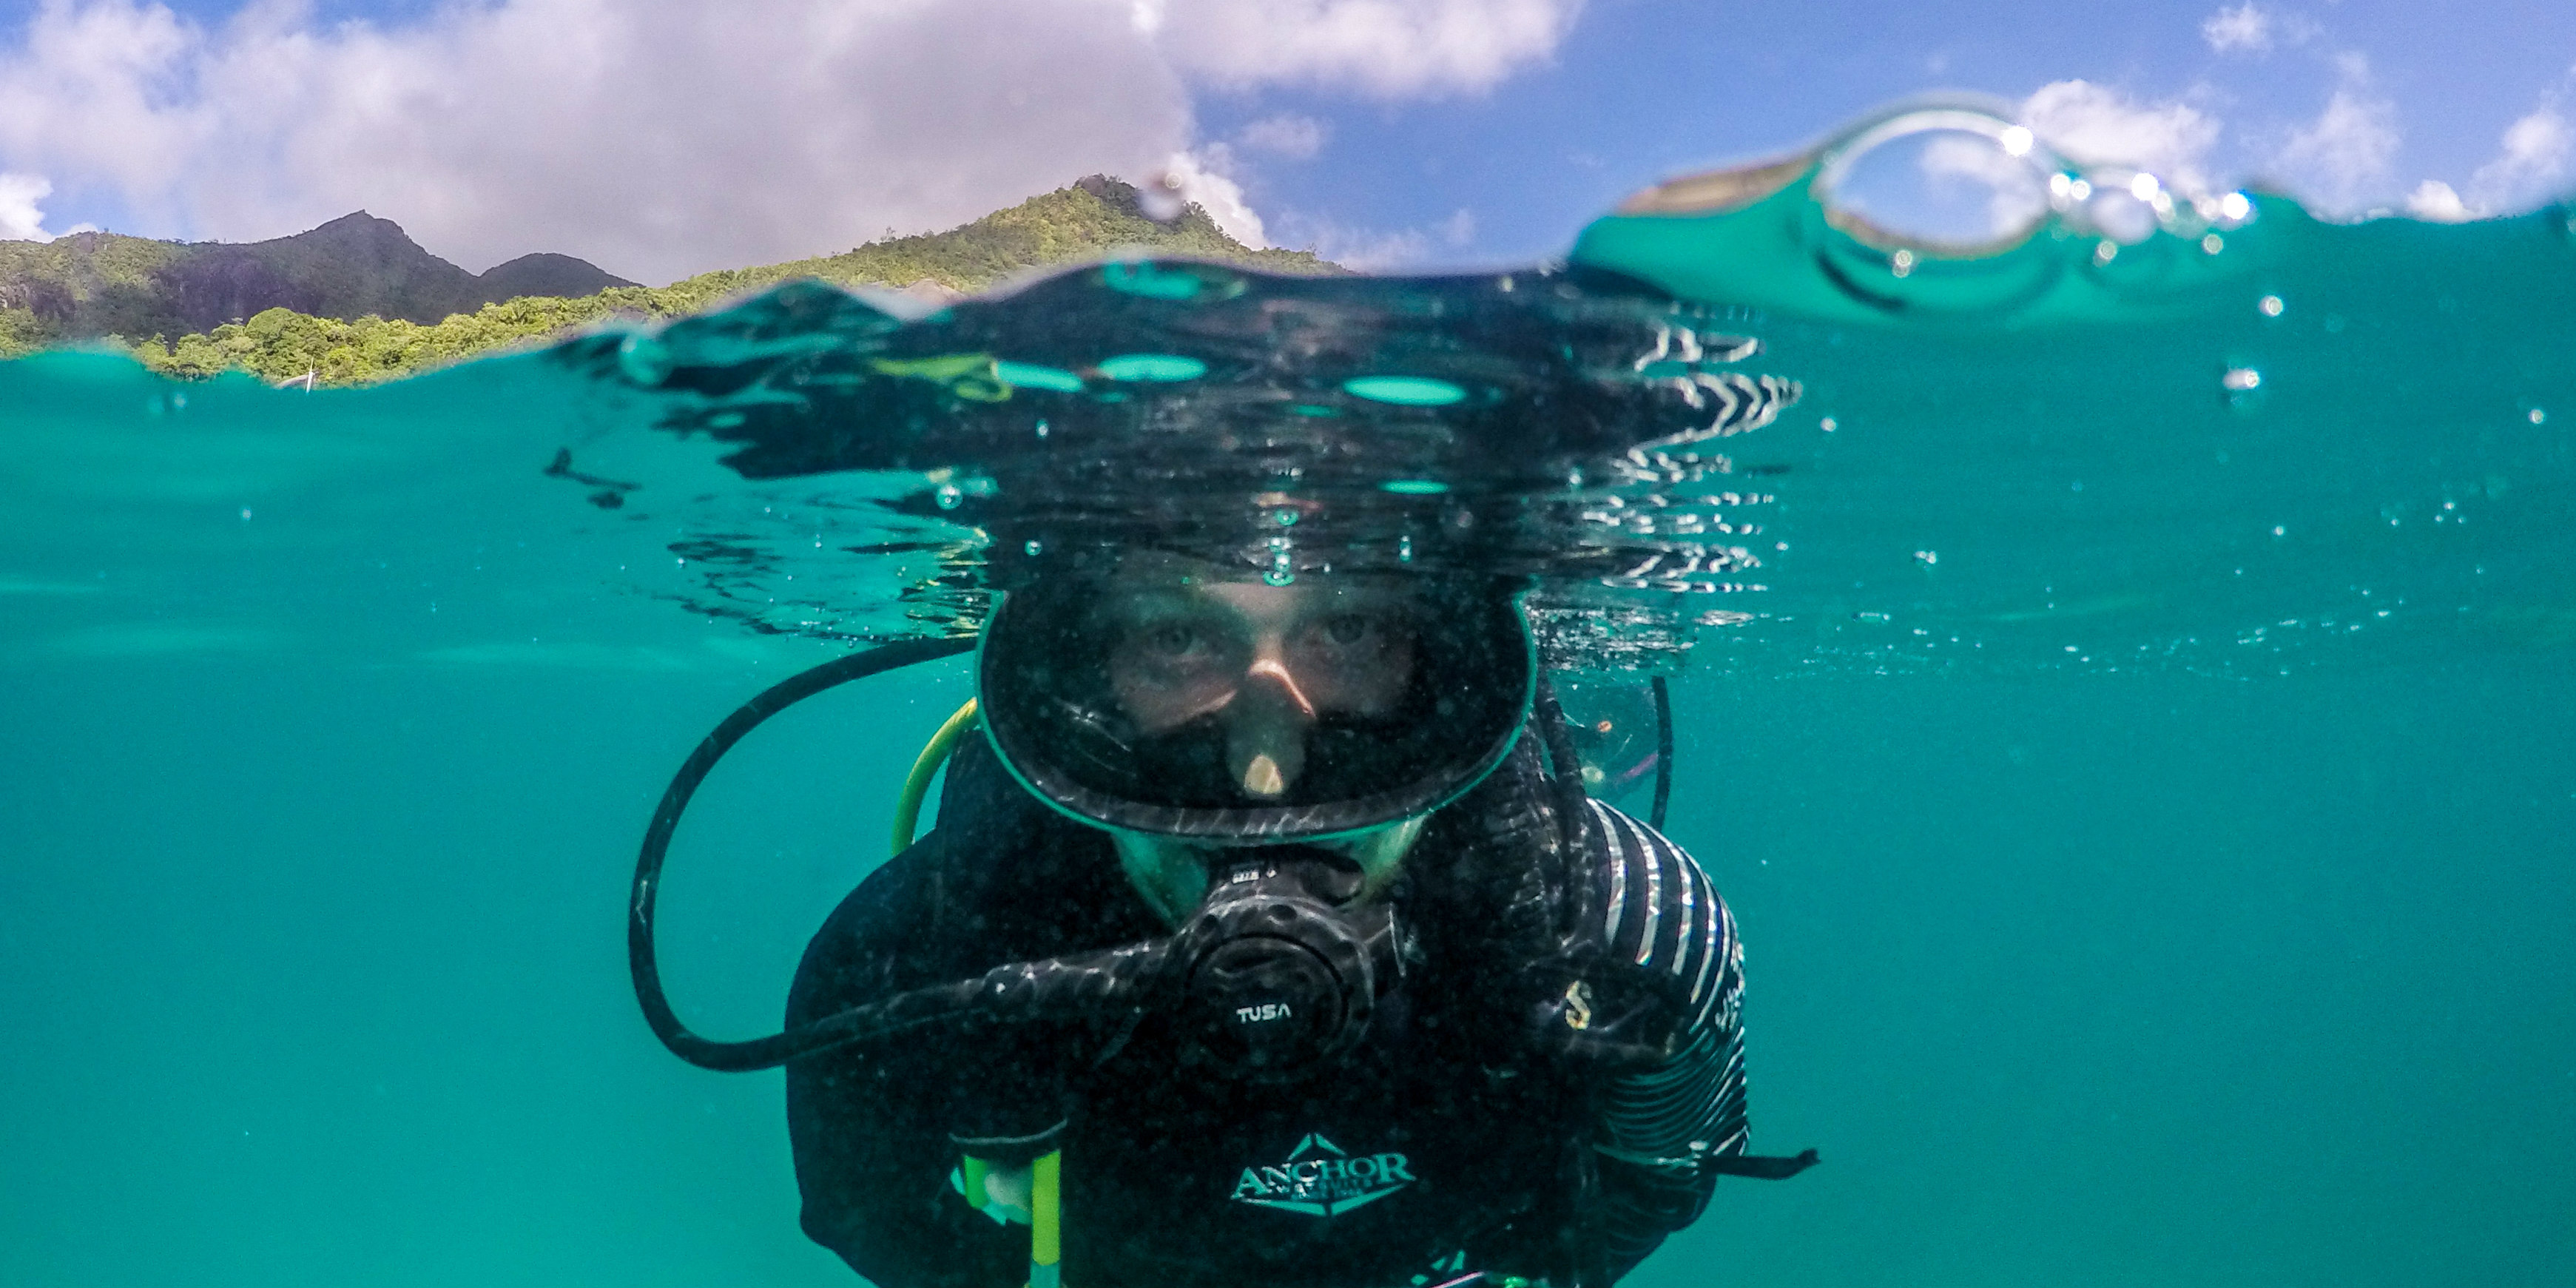 Becoming a PADI certified diver ensures you explore sensitive marine environments responsibly and safely. Pictured: A GVI participant practices diving skills on a marine conservation base.